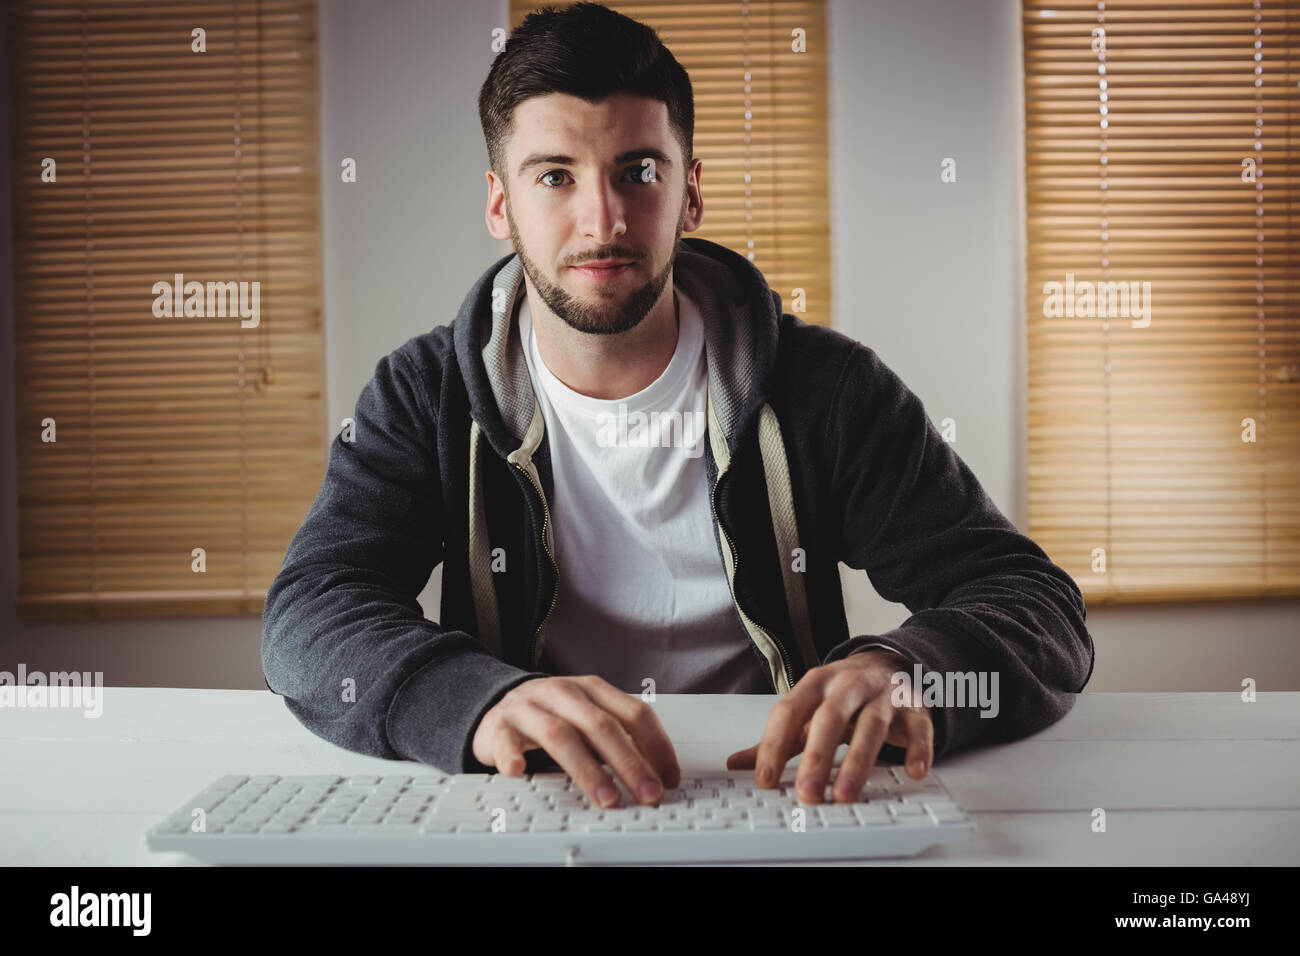 Portrait of young man working in office Stock Photo